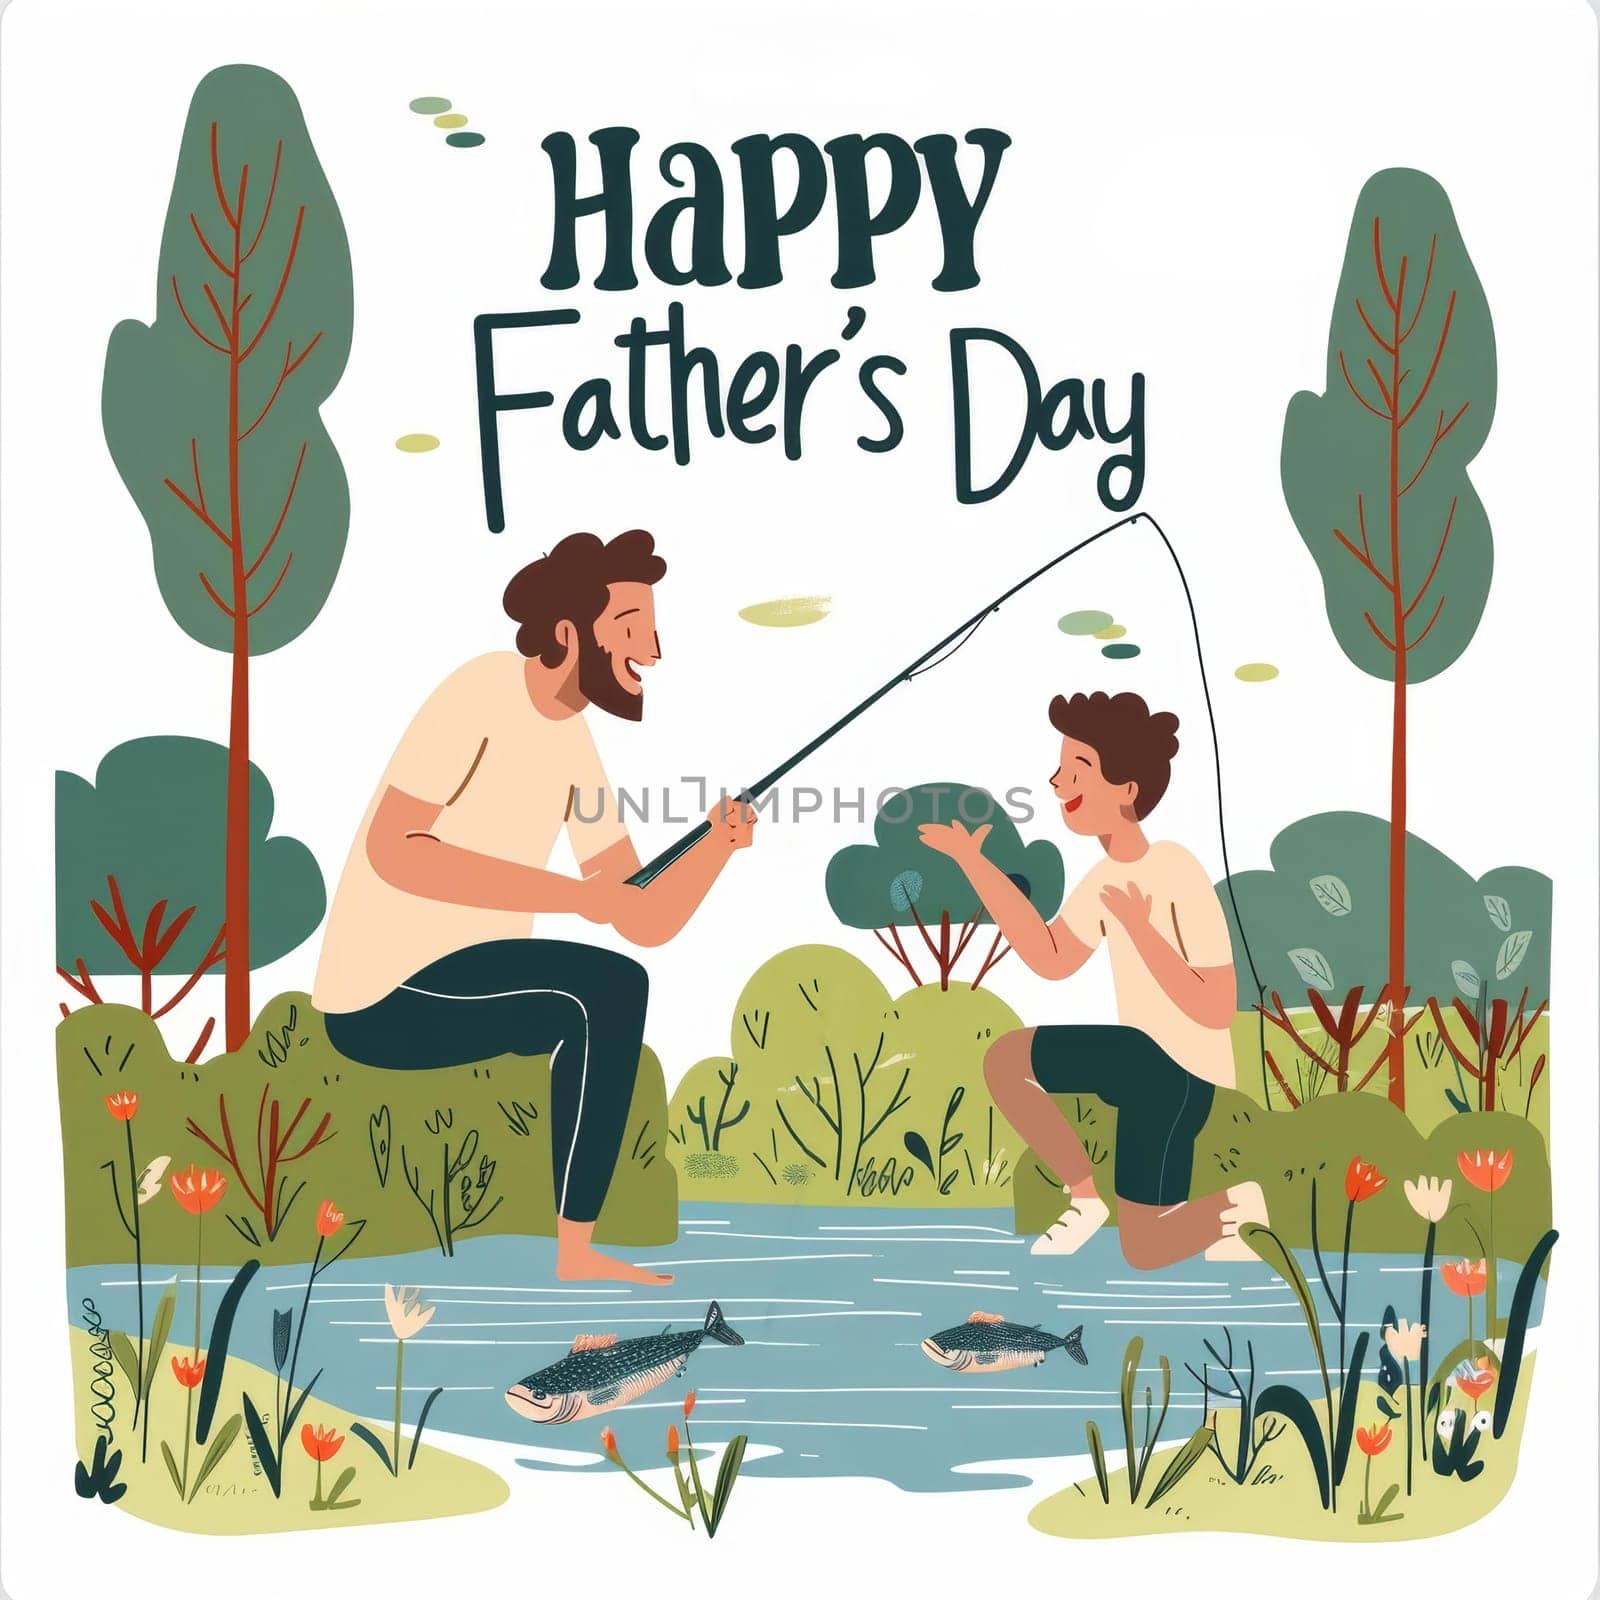 A heartwarming illustration of a father teaching his young son to fish in a lush pond, highlighted by a Happy Fathers Day message above. by sfinks